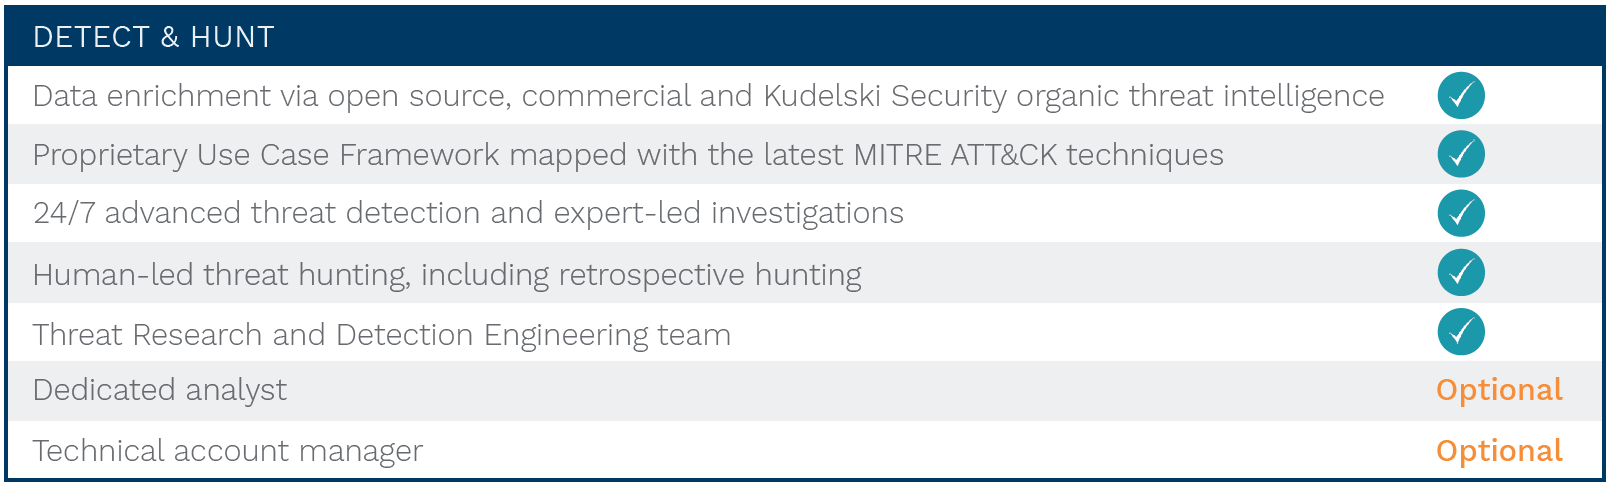 MDR_Detect_Hunt_Feature